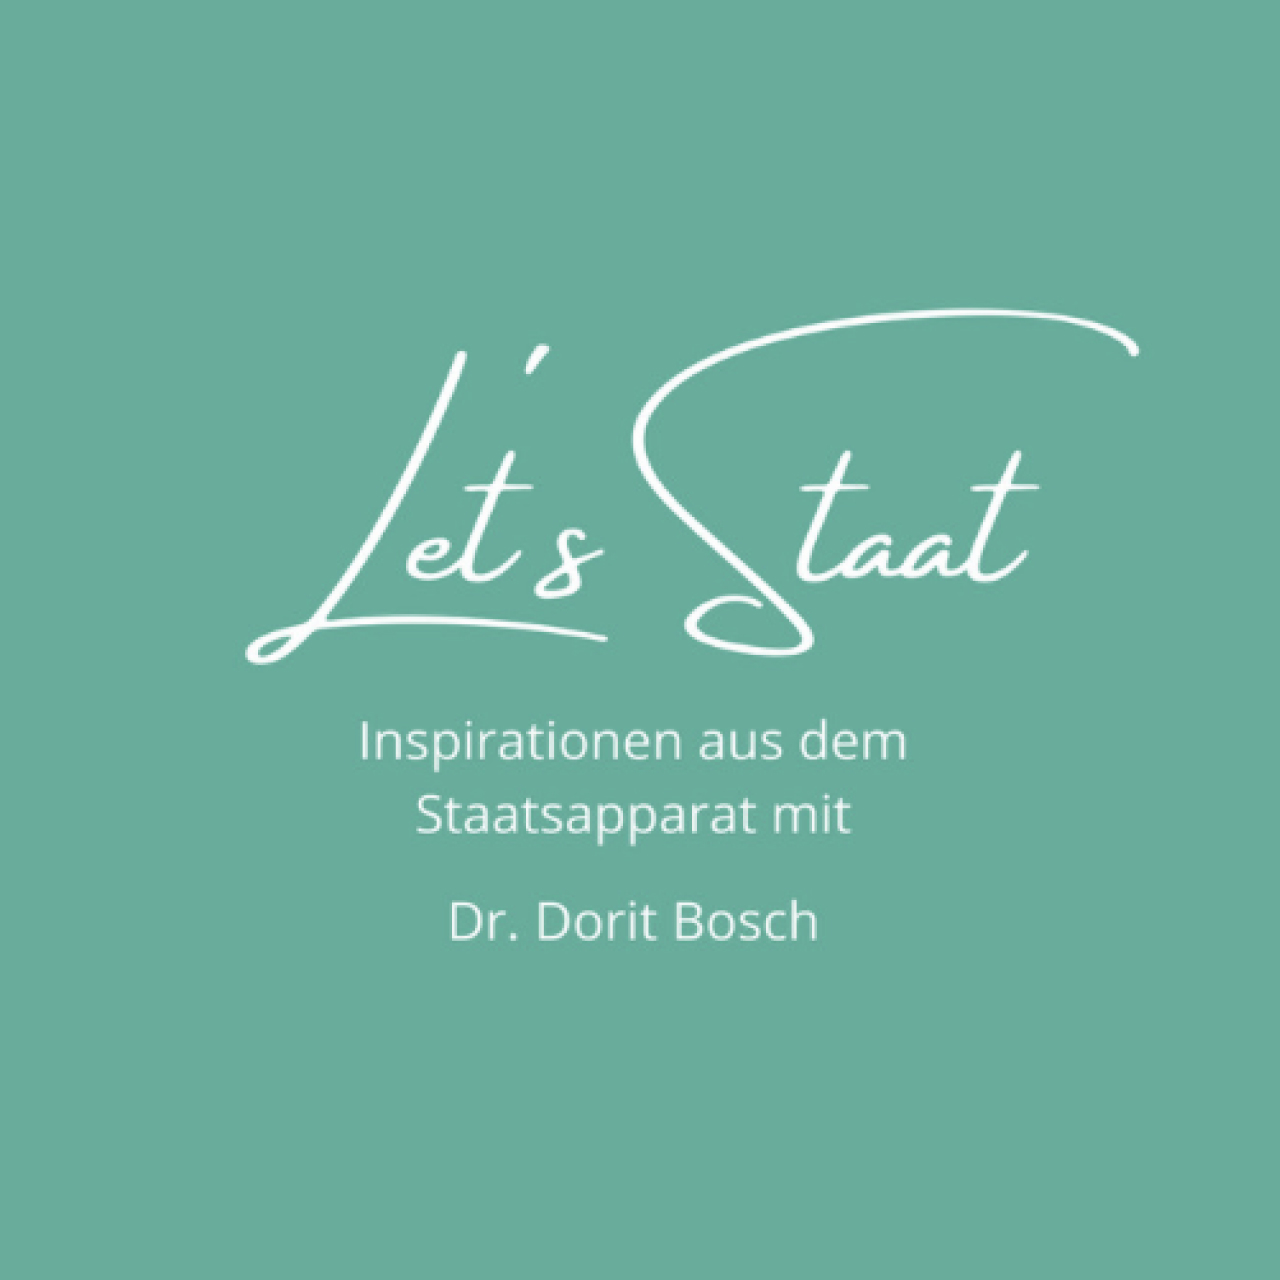 Let's Staat Logo